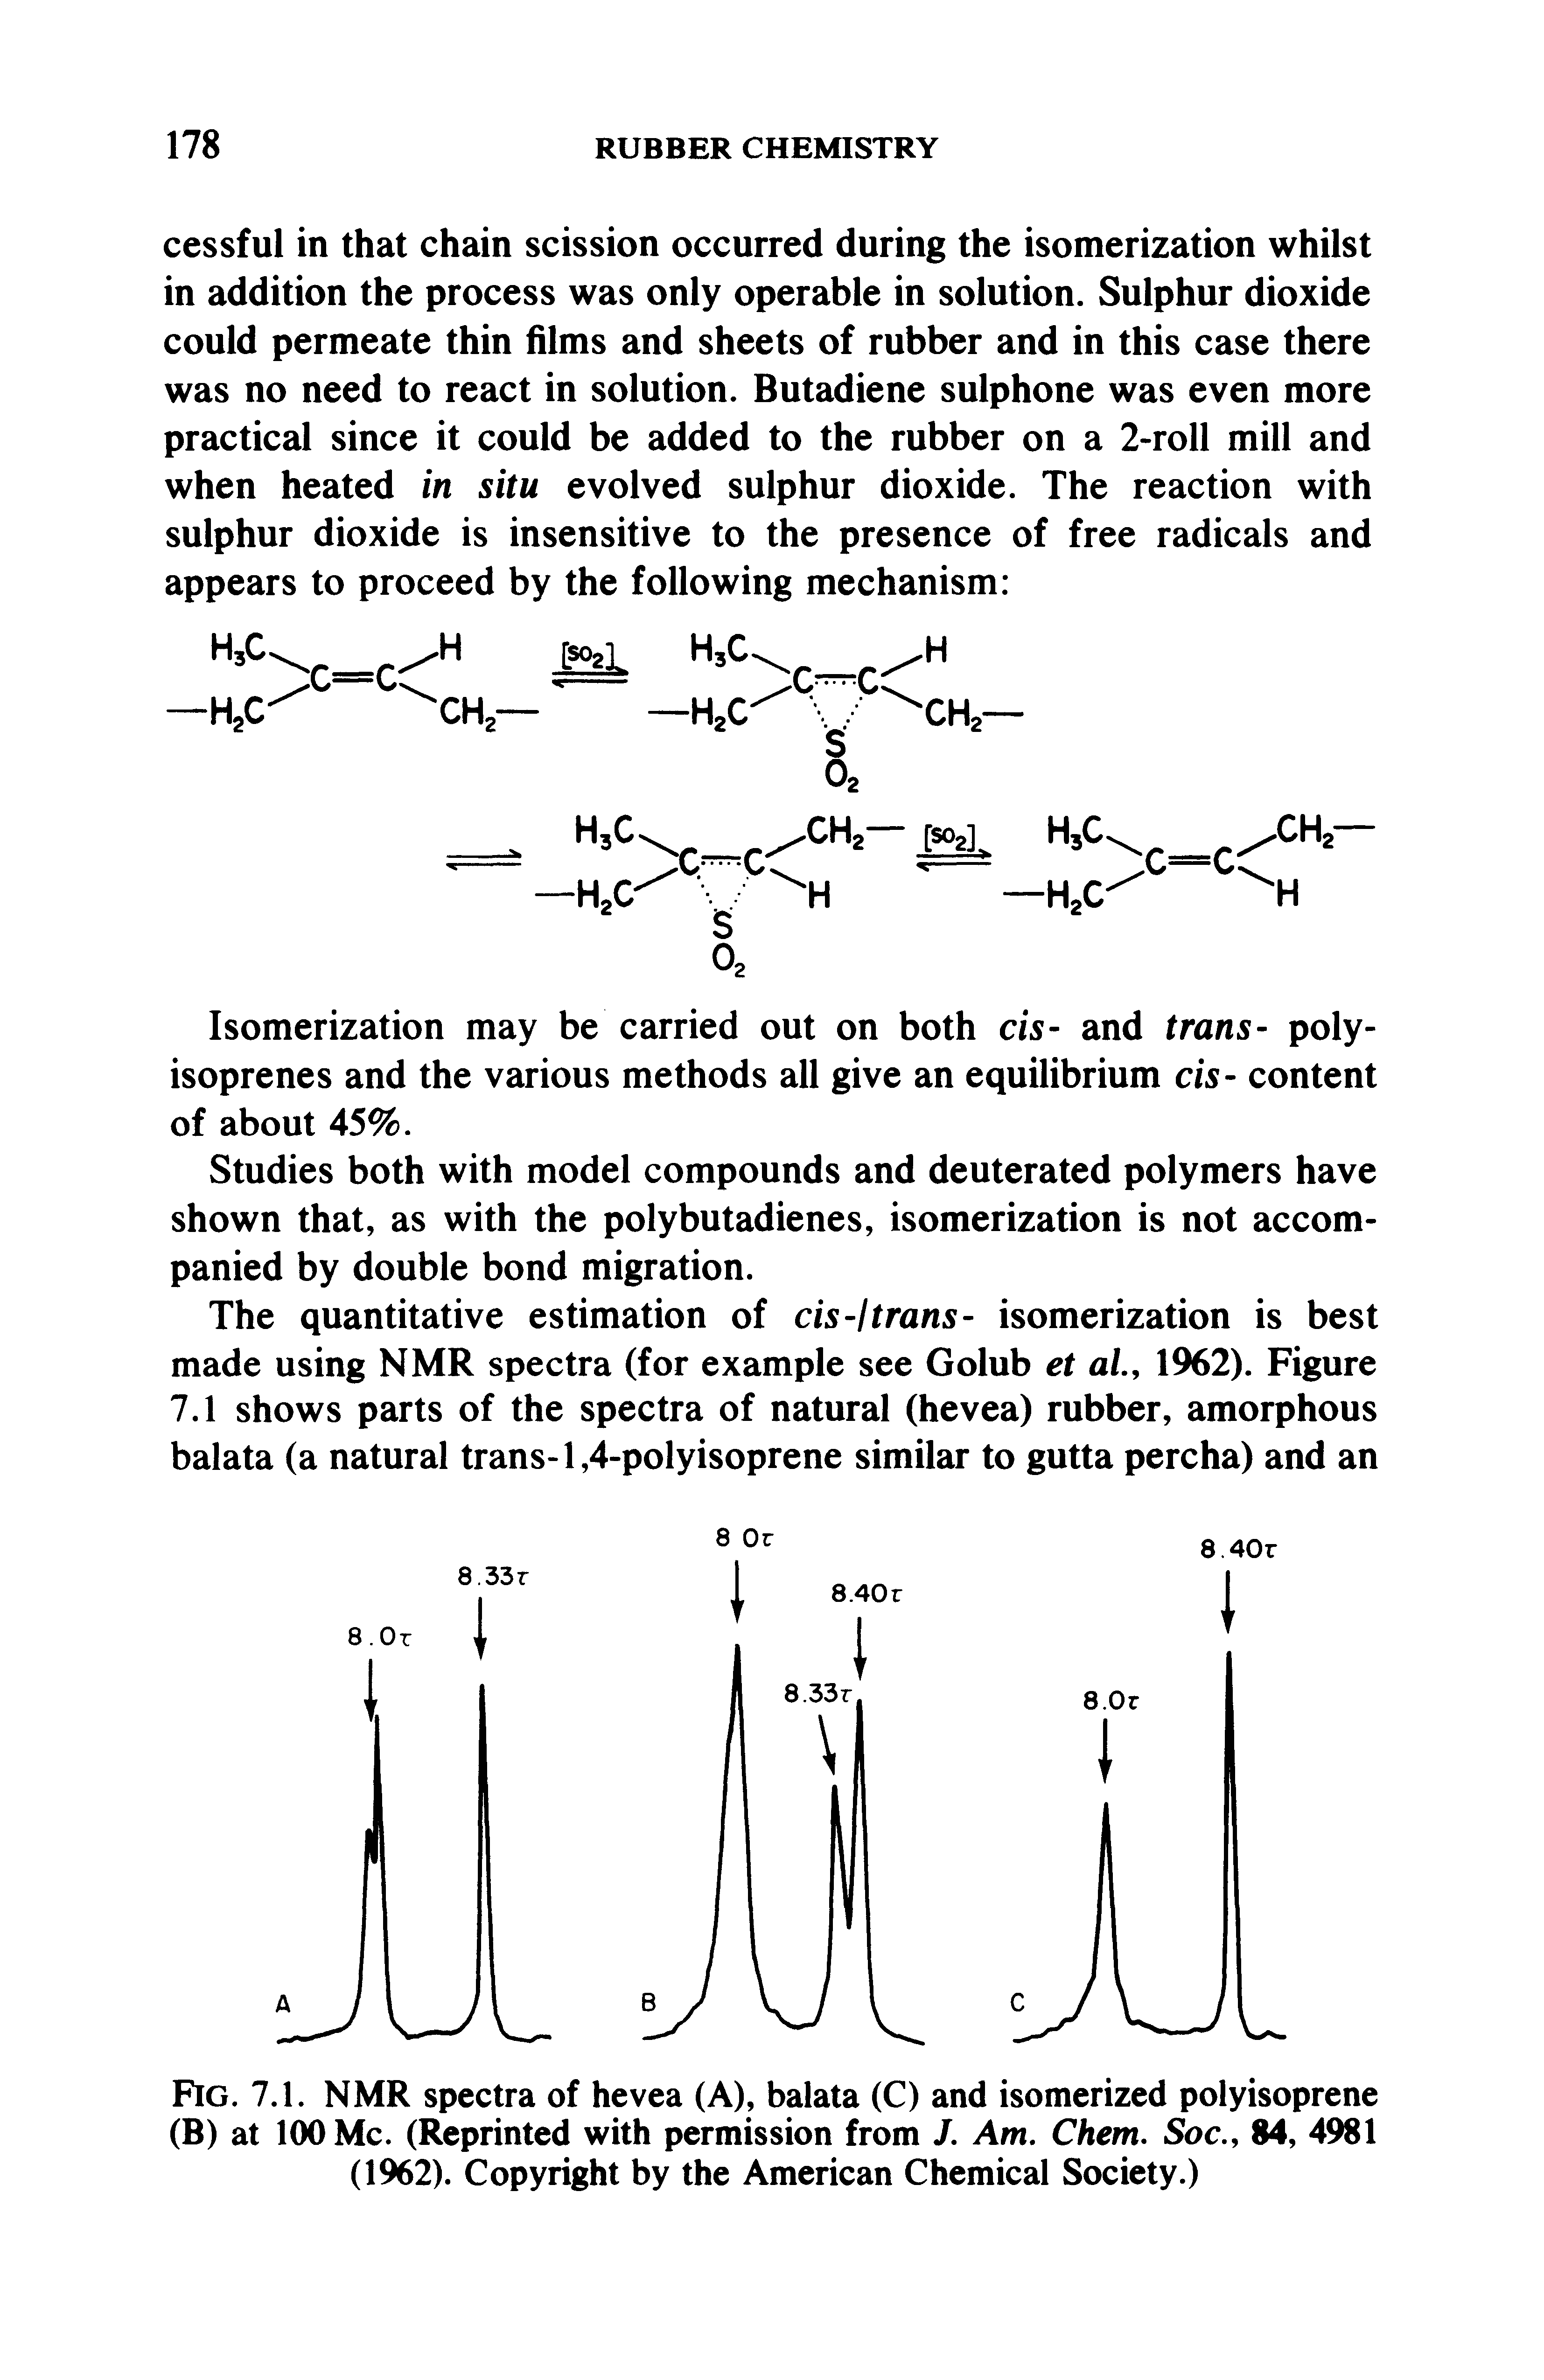 Fig. 7.1. NMR spectra of hevea (A), balata (C) and isomerized polyisoprene (B) at 100 Me. (Reprinted with permission from J. Am. Chem. Soc., 84, 4981 (1962). Copyright by the American Chemical Society.)...